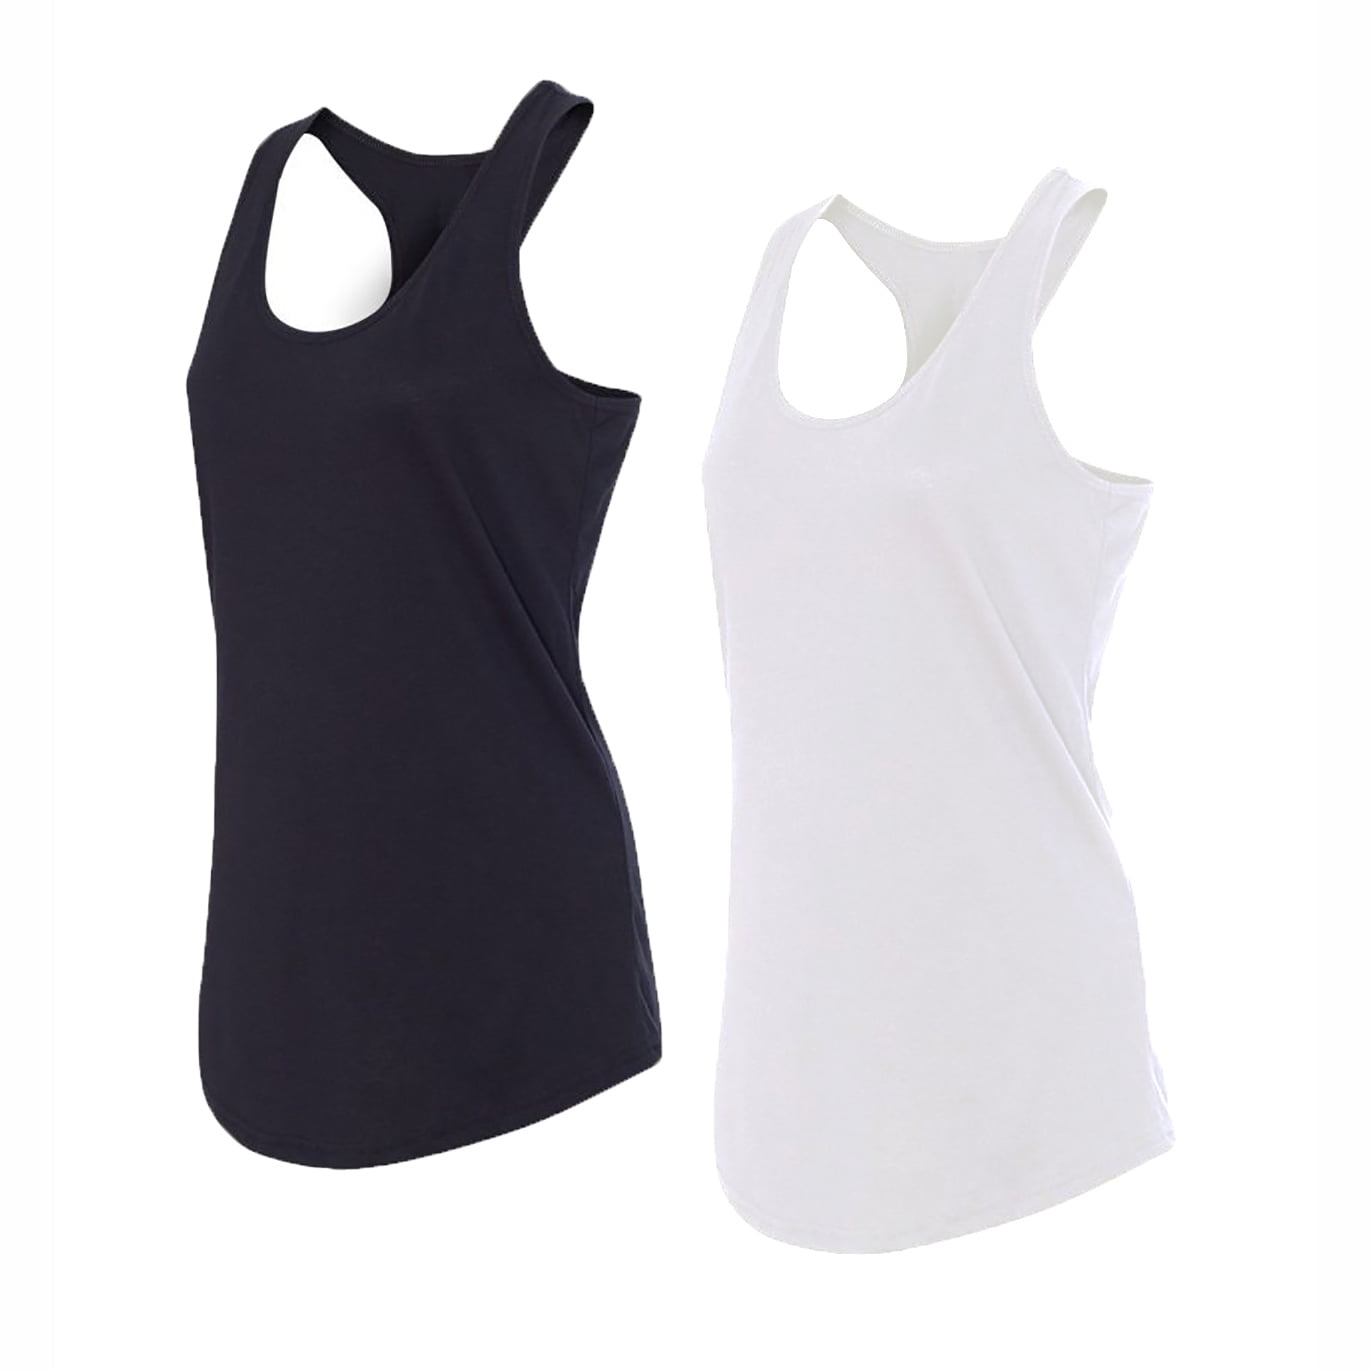 Home Yoga Tank Tops for Women Pack of 2 Womens Performance Stretchy Quick Dry Sports Workout Top Vest 